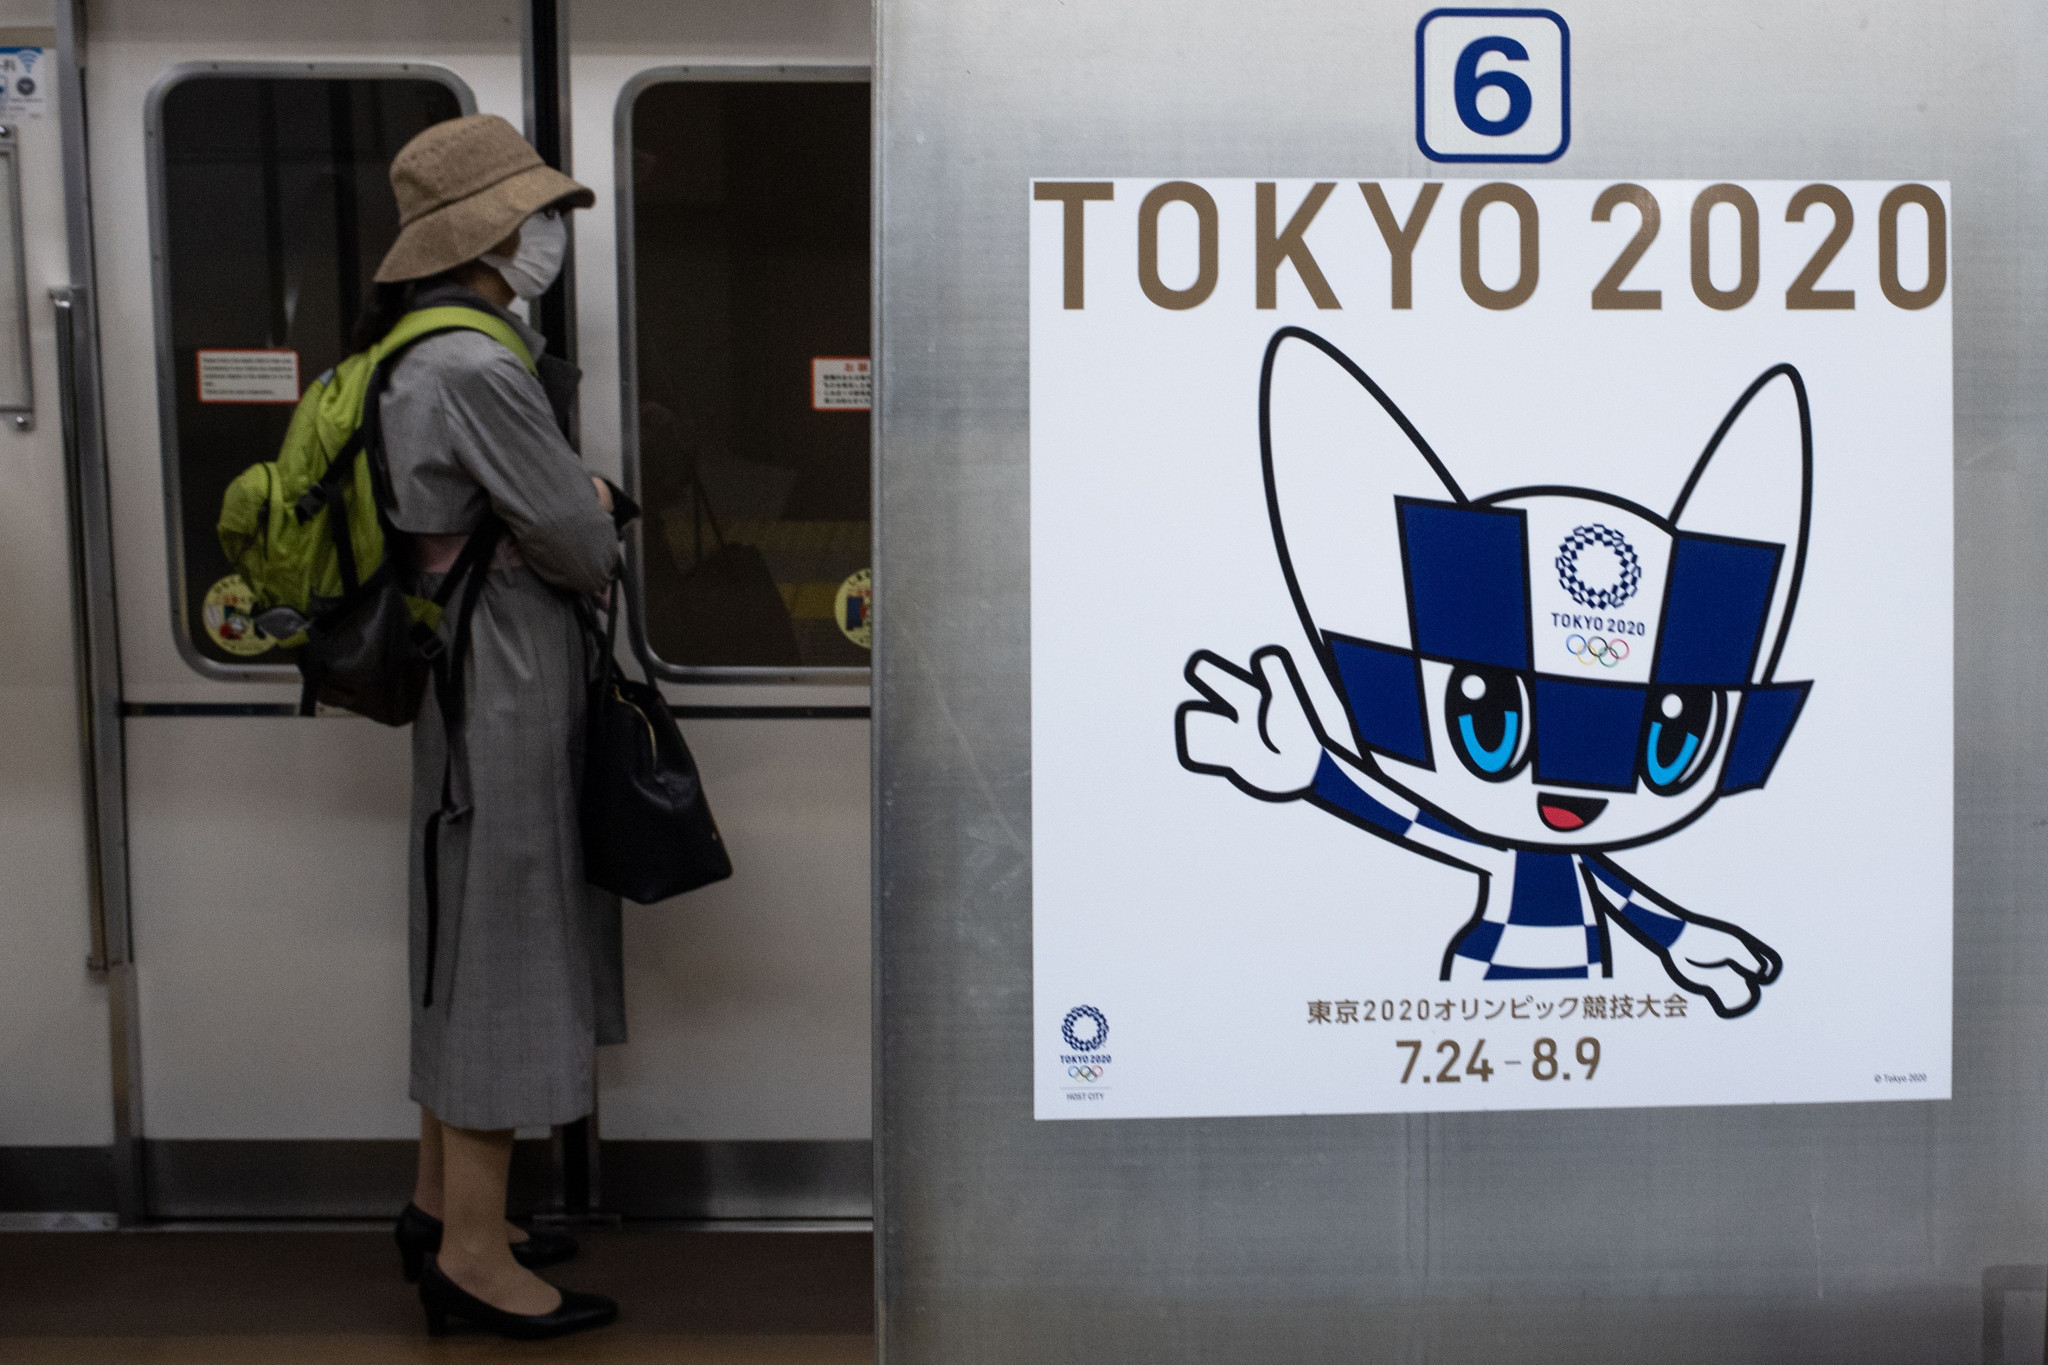 There are concerns the coronavirus pandemic may still impact the Tokyo 2020 Olympic and Paralympic Games, even though they have been postponed to 2021 ©Getty Images